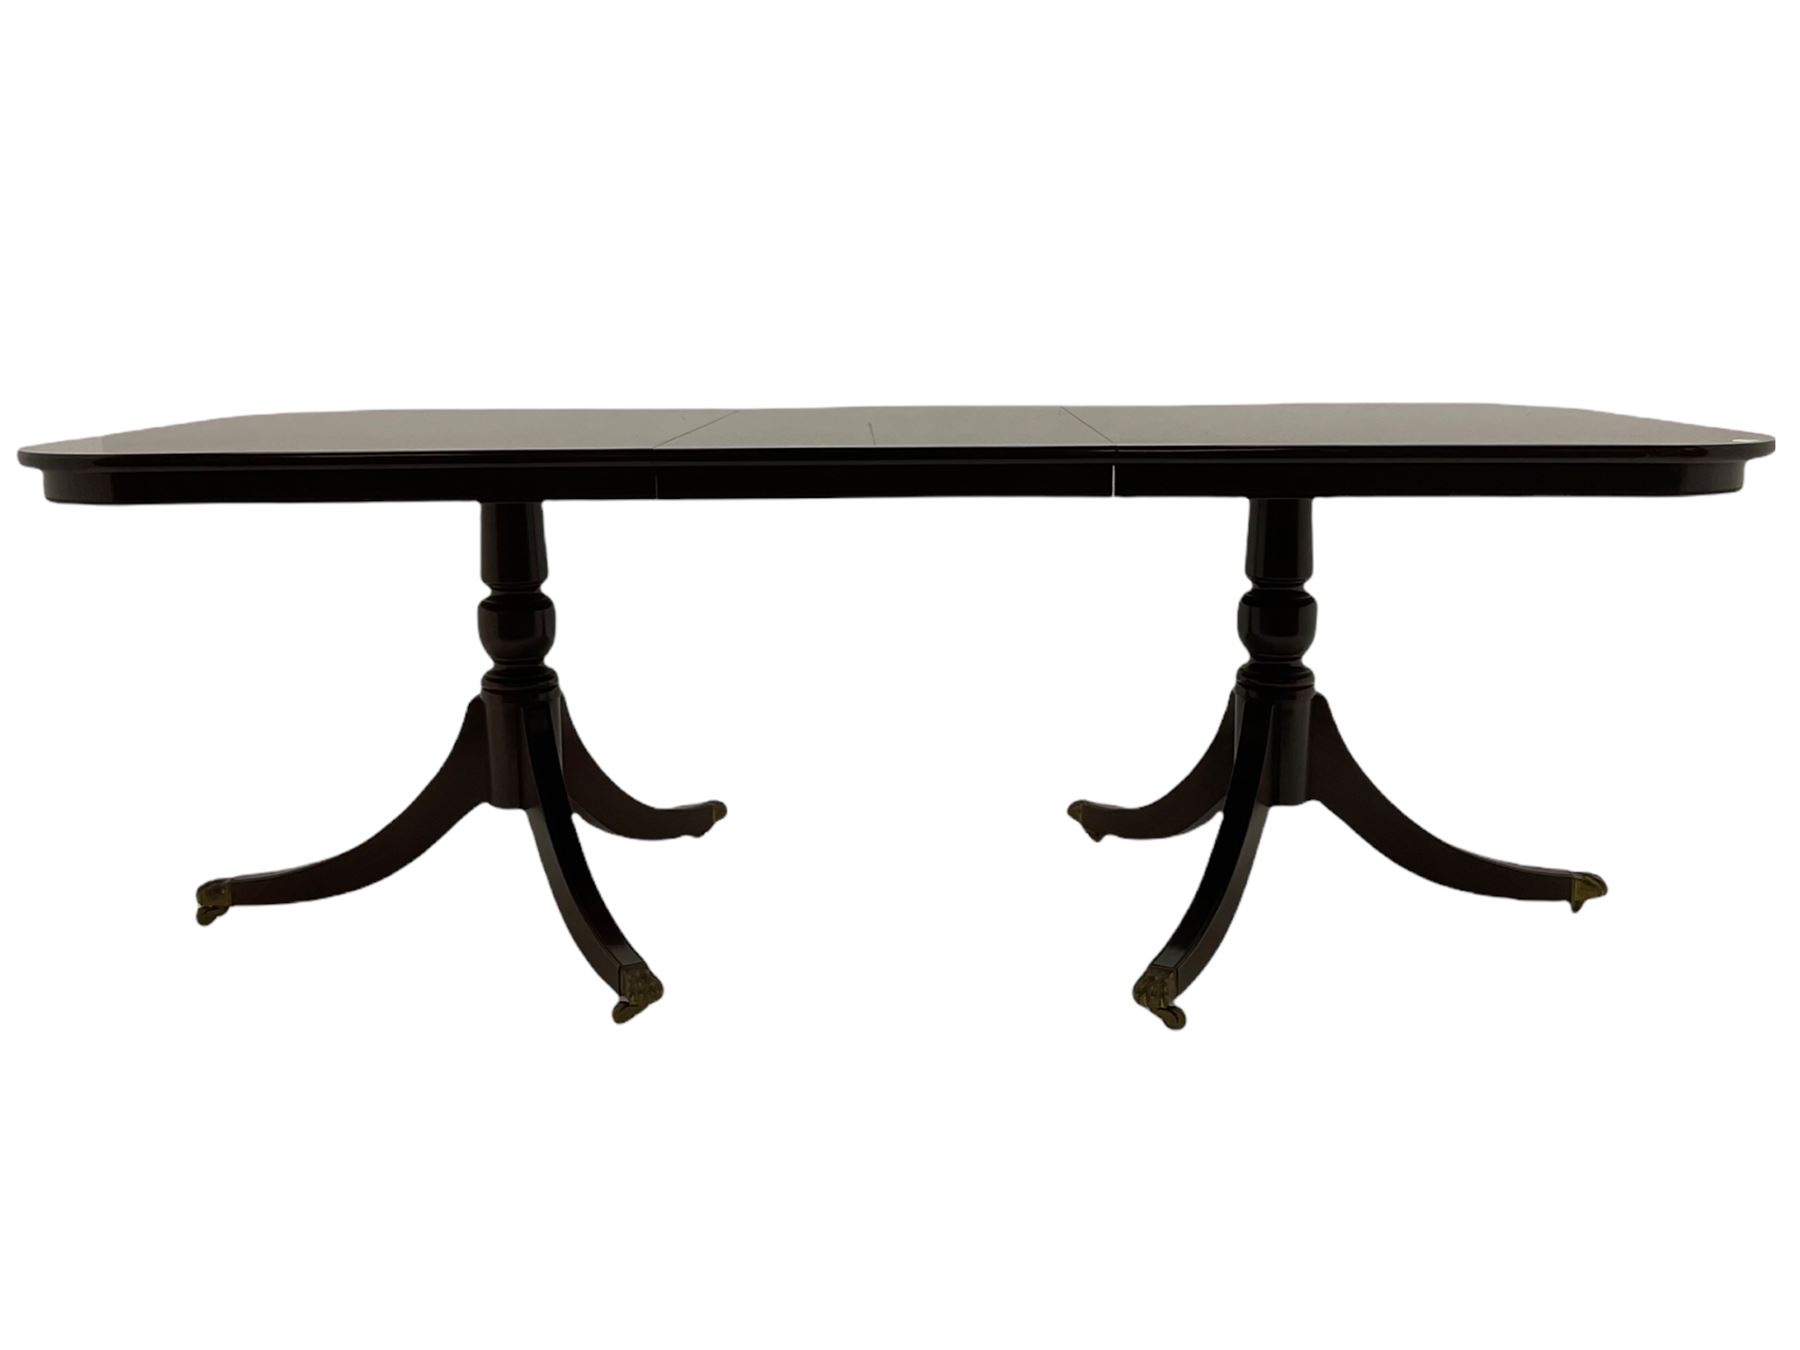 Regency style mahogany twin pedestal dining table - Image 2 of 9